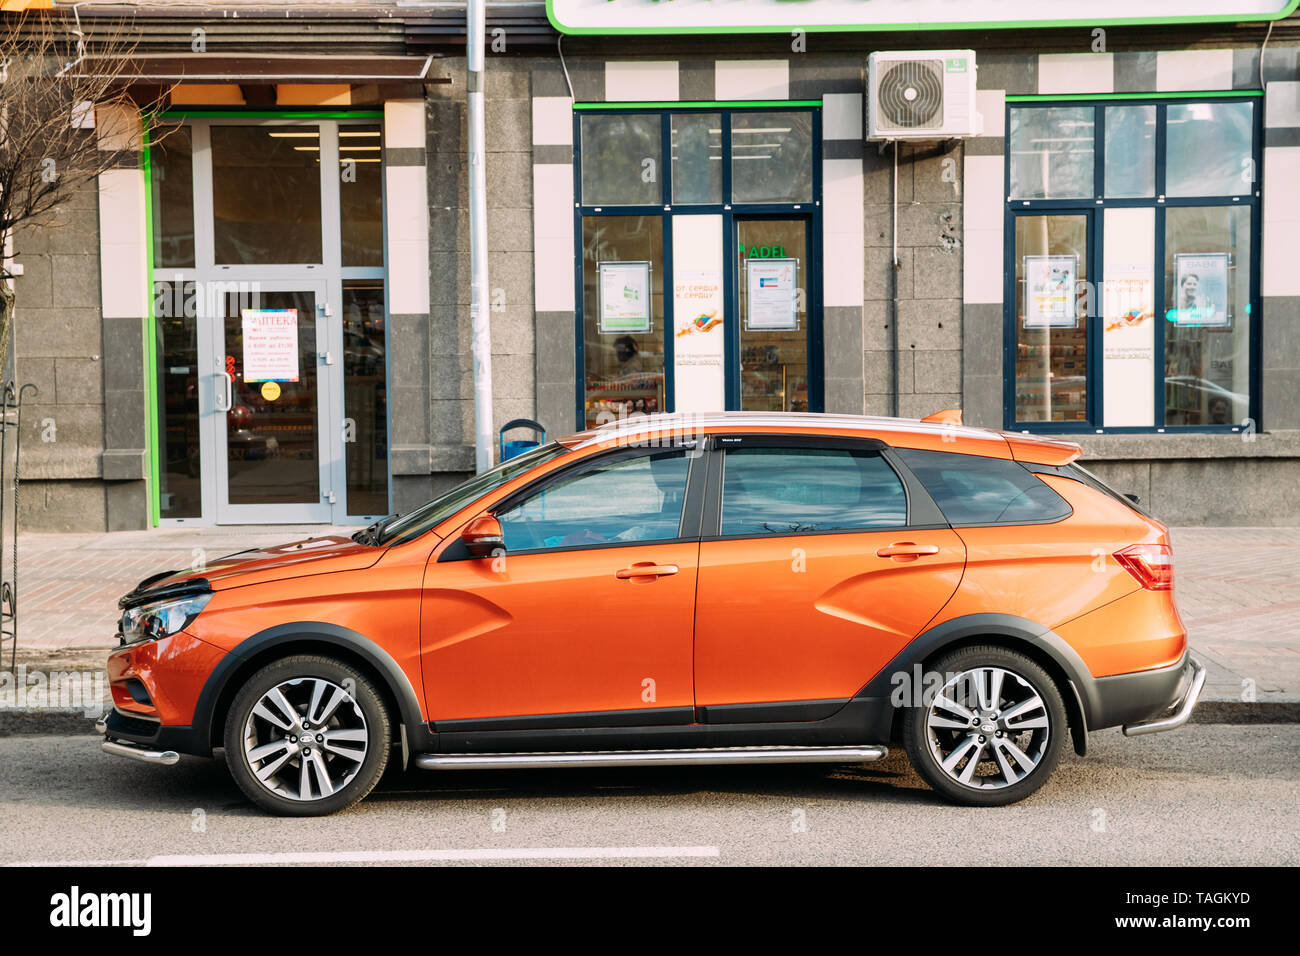 Lada vesta sw cross hi-res stock photography and images - Alamy